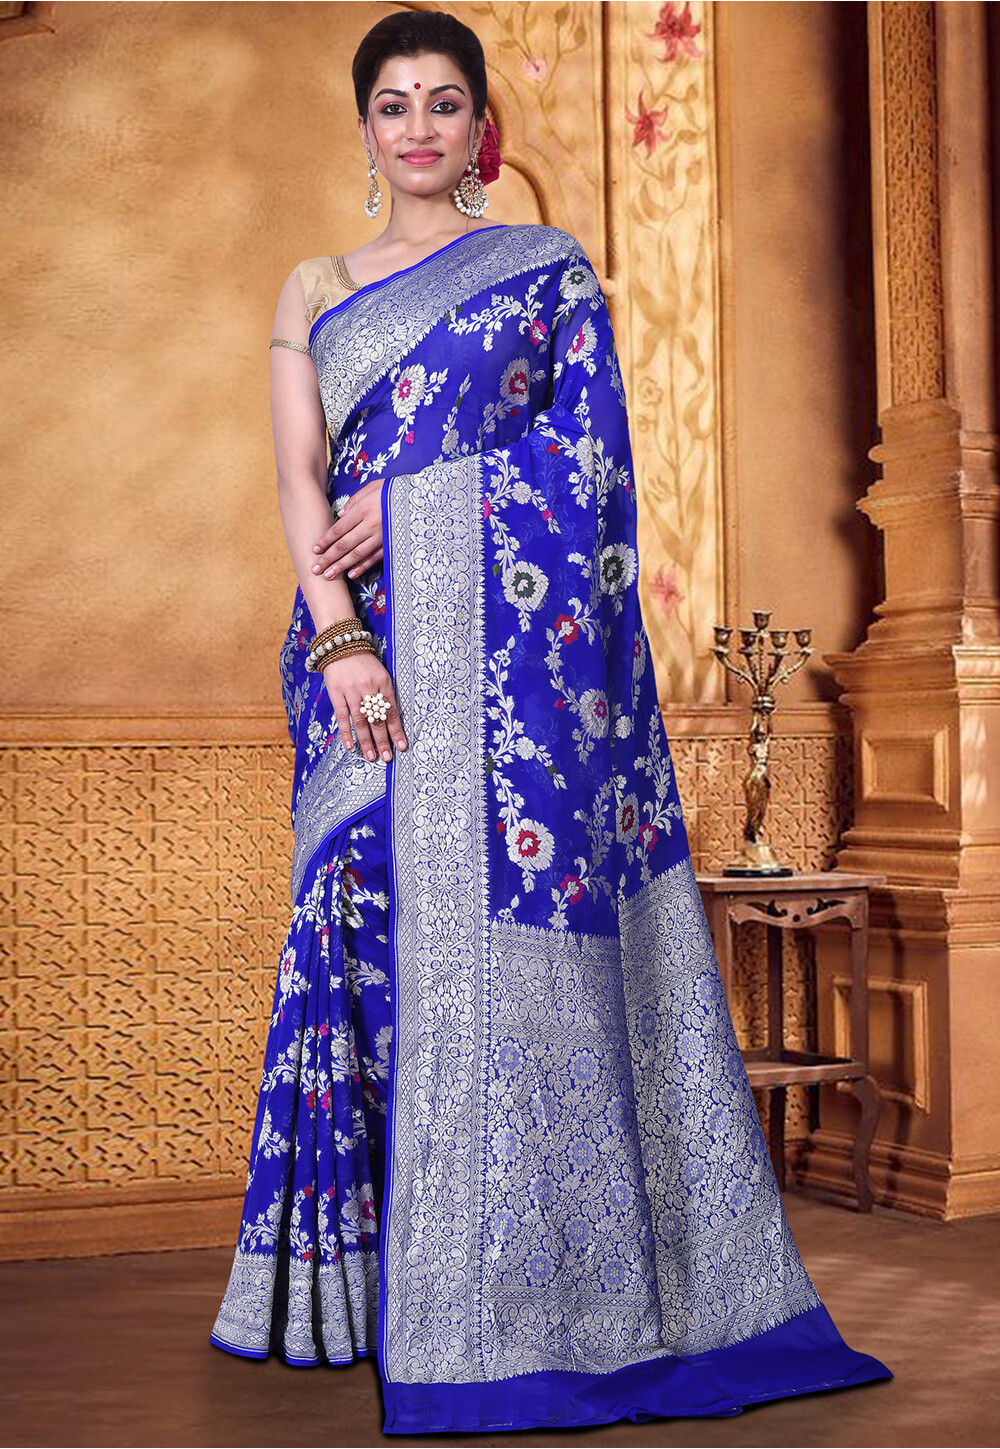 Banarasi pure georgette zari woven saree at Rs.949/Pack in surat offer by  geet gauri fashion